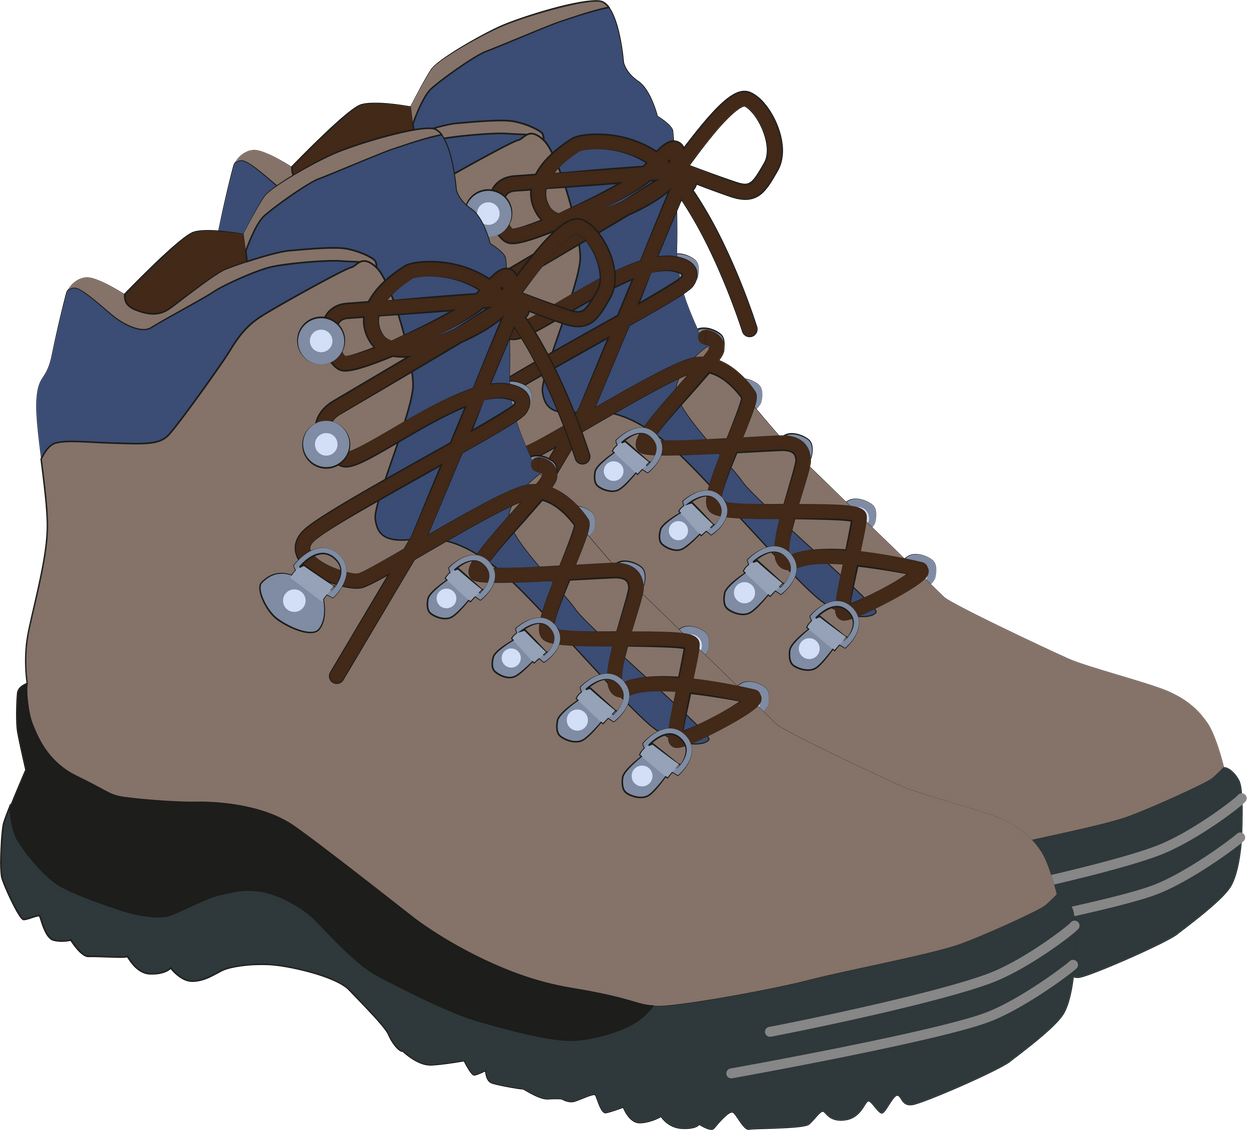 Hiking Boots Mountain Shoes Icon. Flat Illustration of Hiking Boots Mountain Shoes